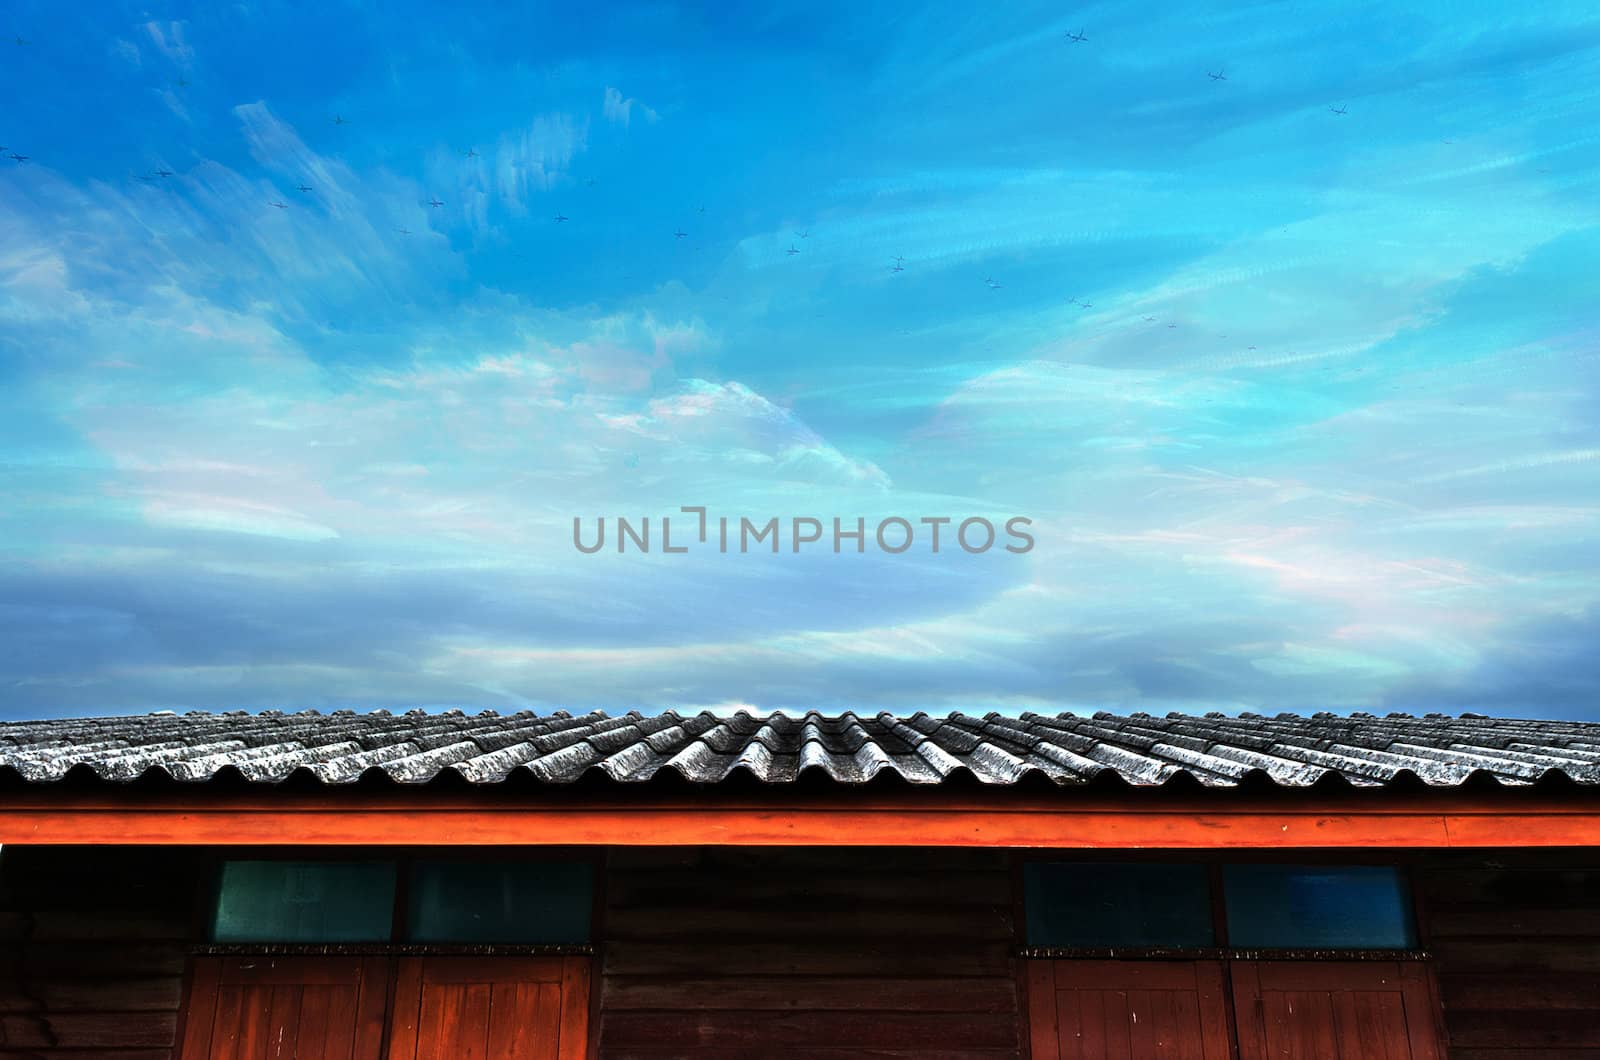 The Moving Planes, Cloudy Blue Sky and Roof of Wooden House.